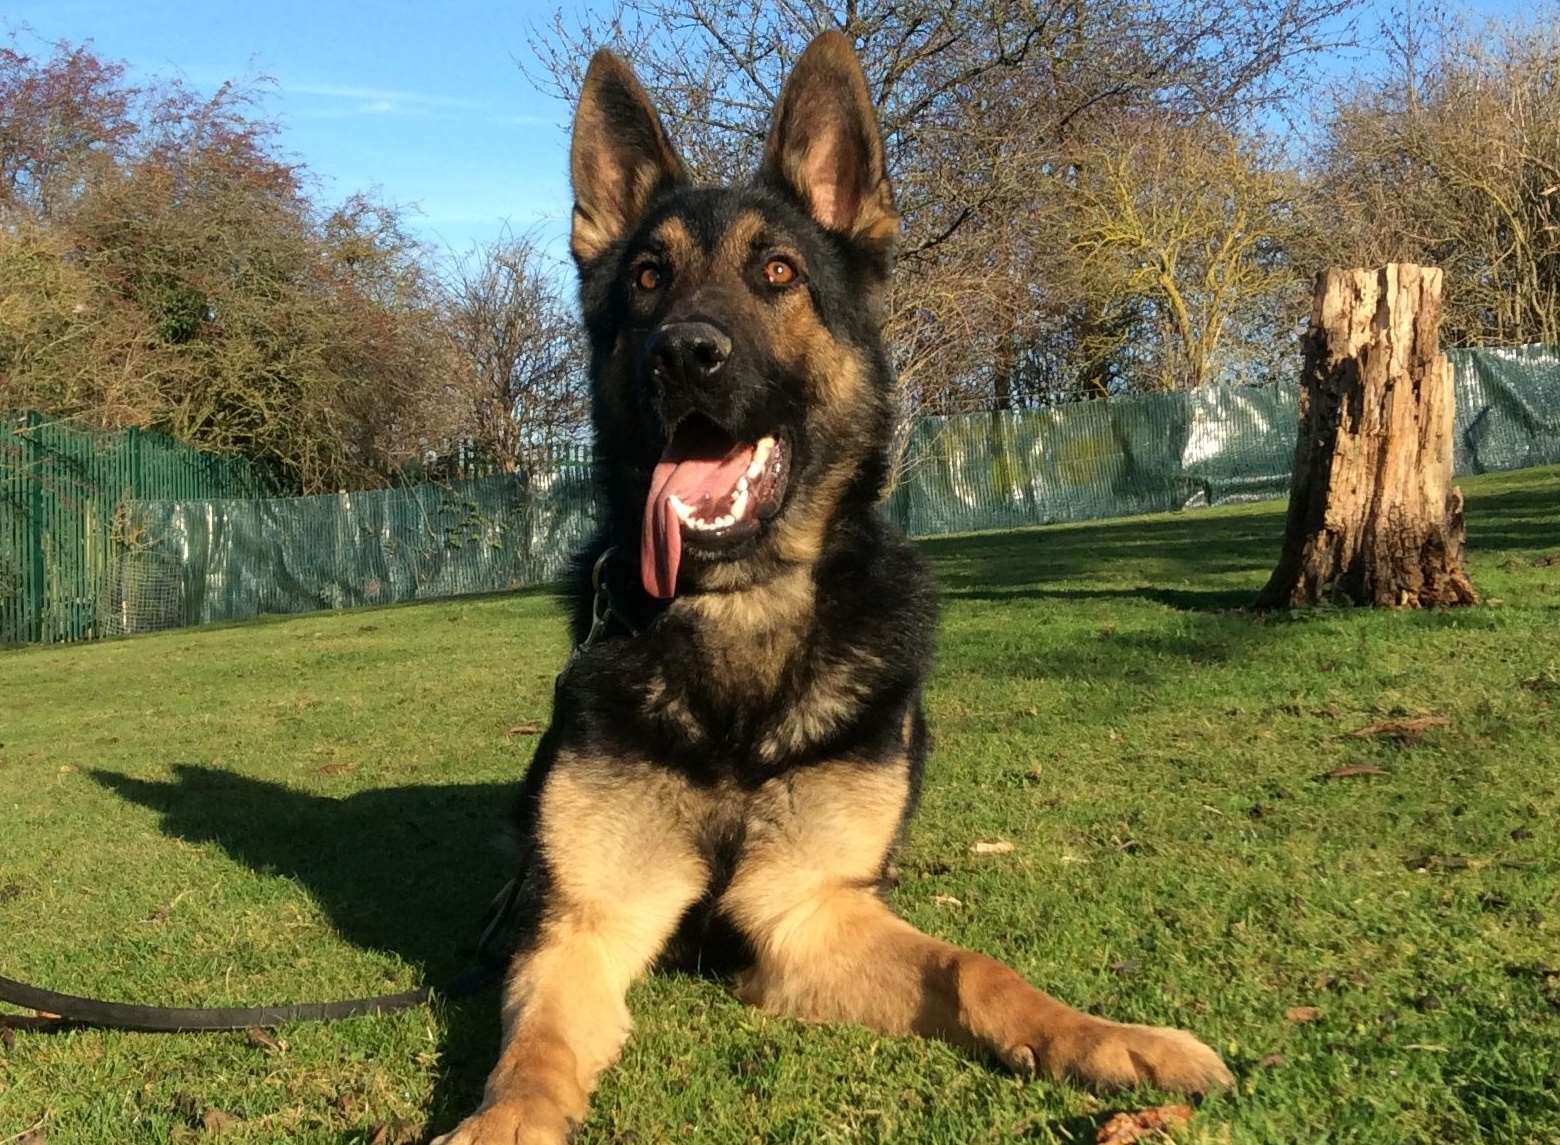 Police dog Eli sniffed out the suspect